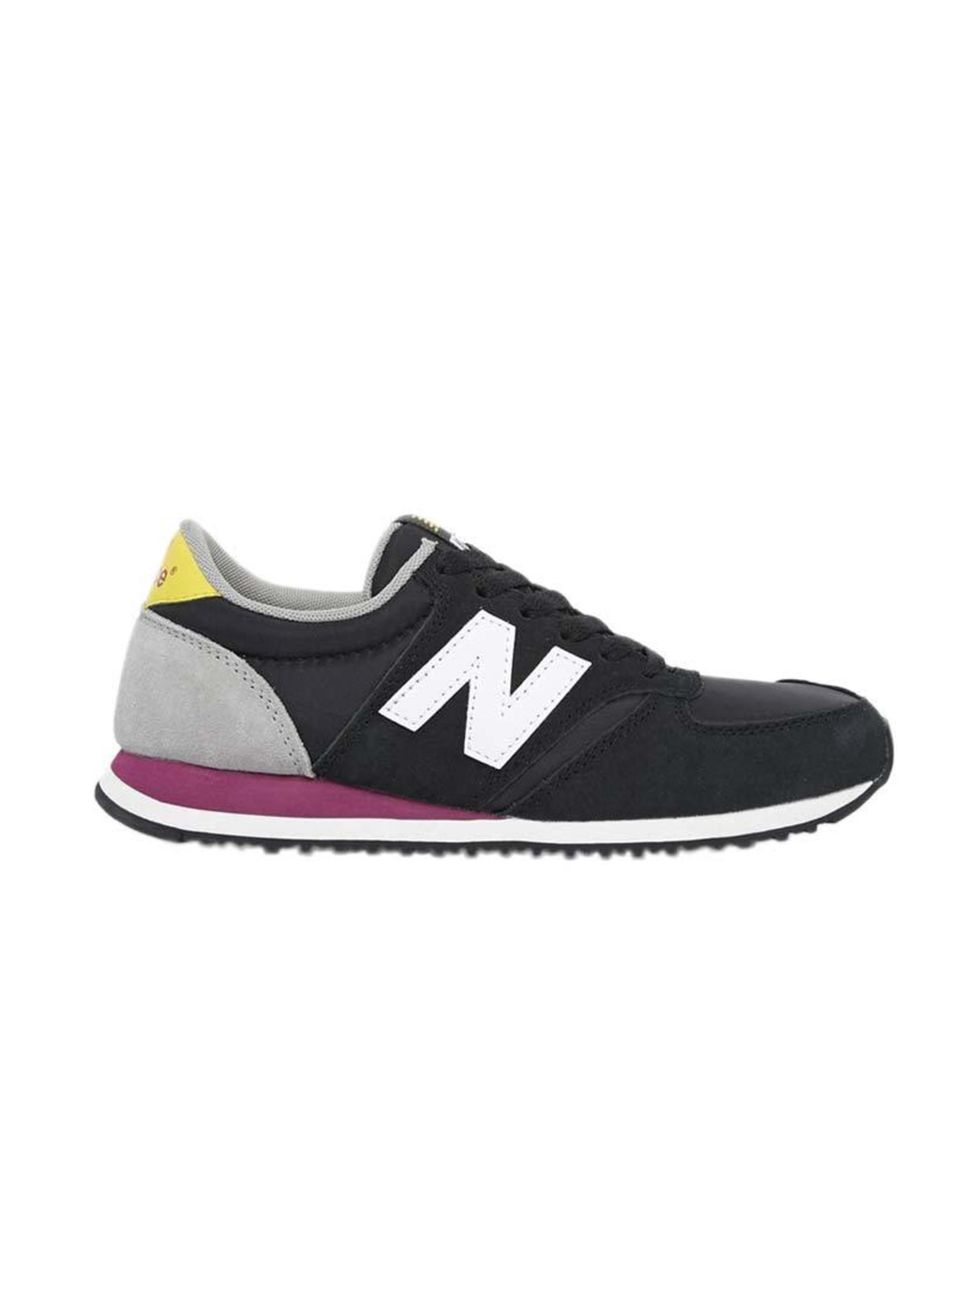 <p>These multi-coloured beauties are Market & Retail Editor Harriet Stewart's latest foot-candy.</p>

<p> </p>

<p>New Balance trainers, £60 at <a href="http://www.asos.com/New-Balance/New-Balance-420-Suede-Mix-Black-Yellow-Trainers/Prod/pgeproduct.aspx?i